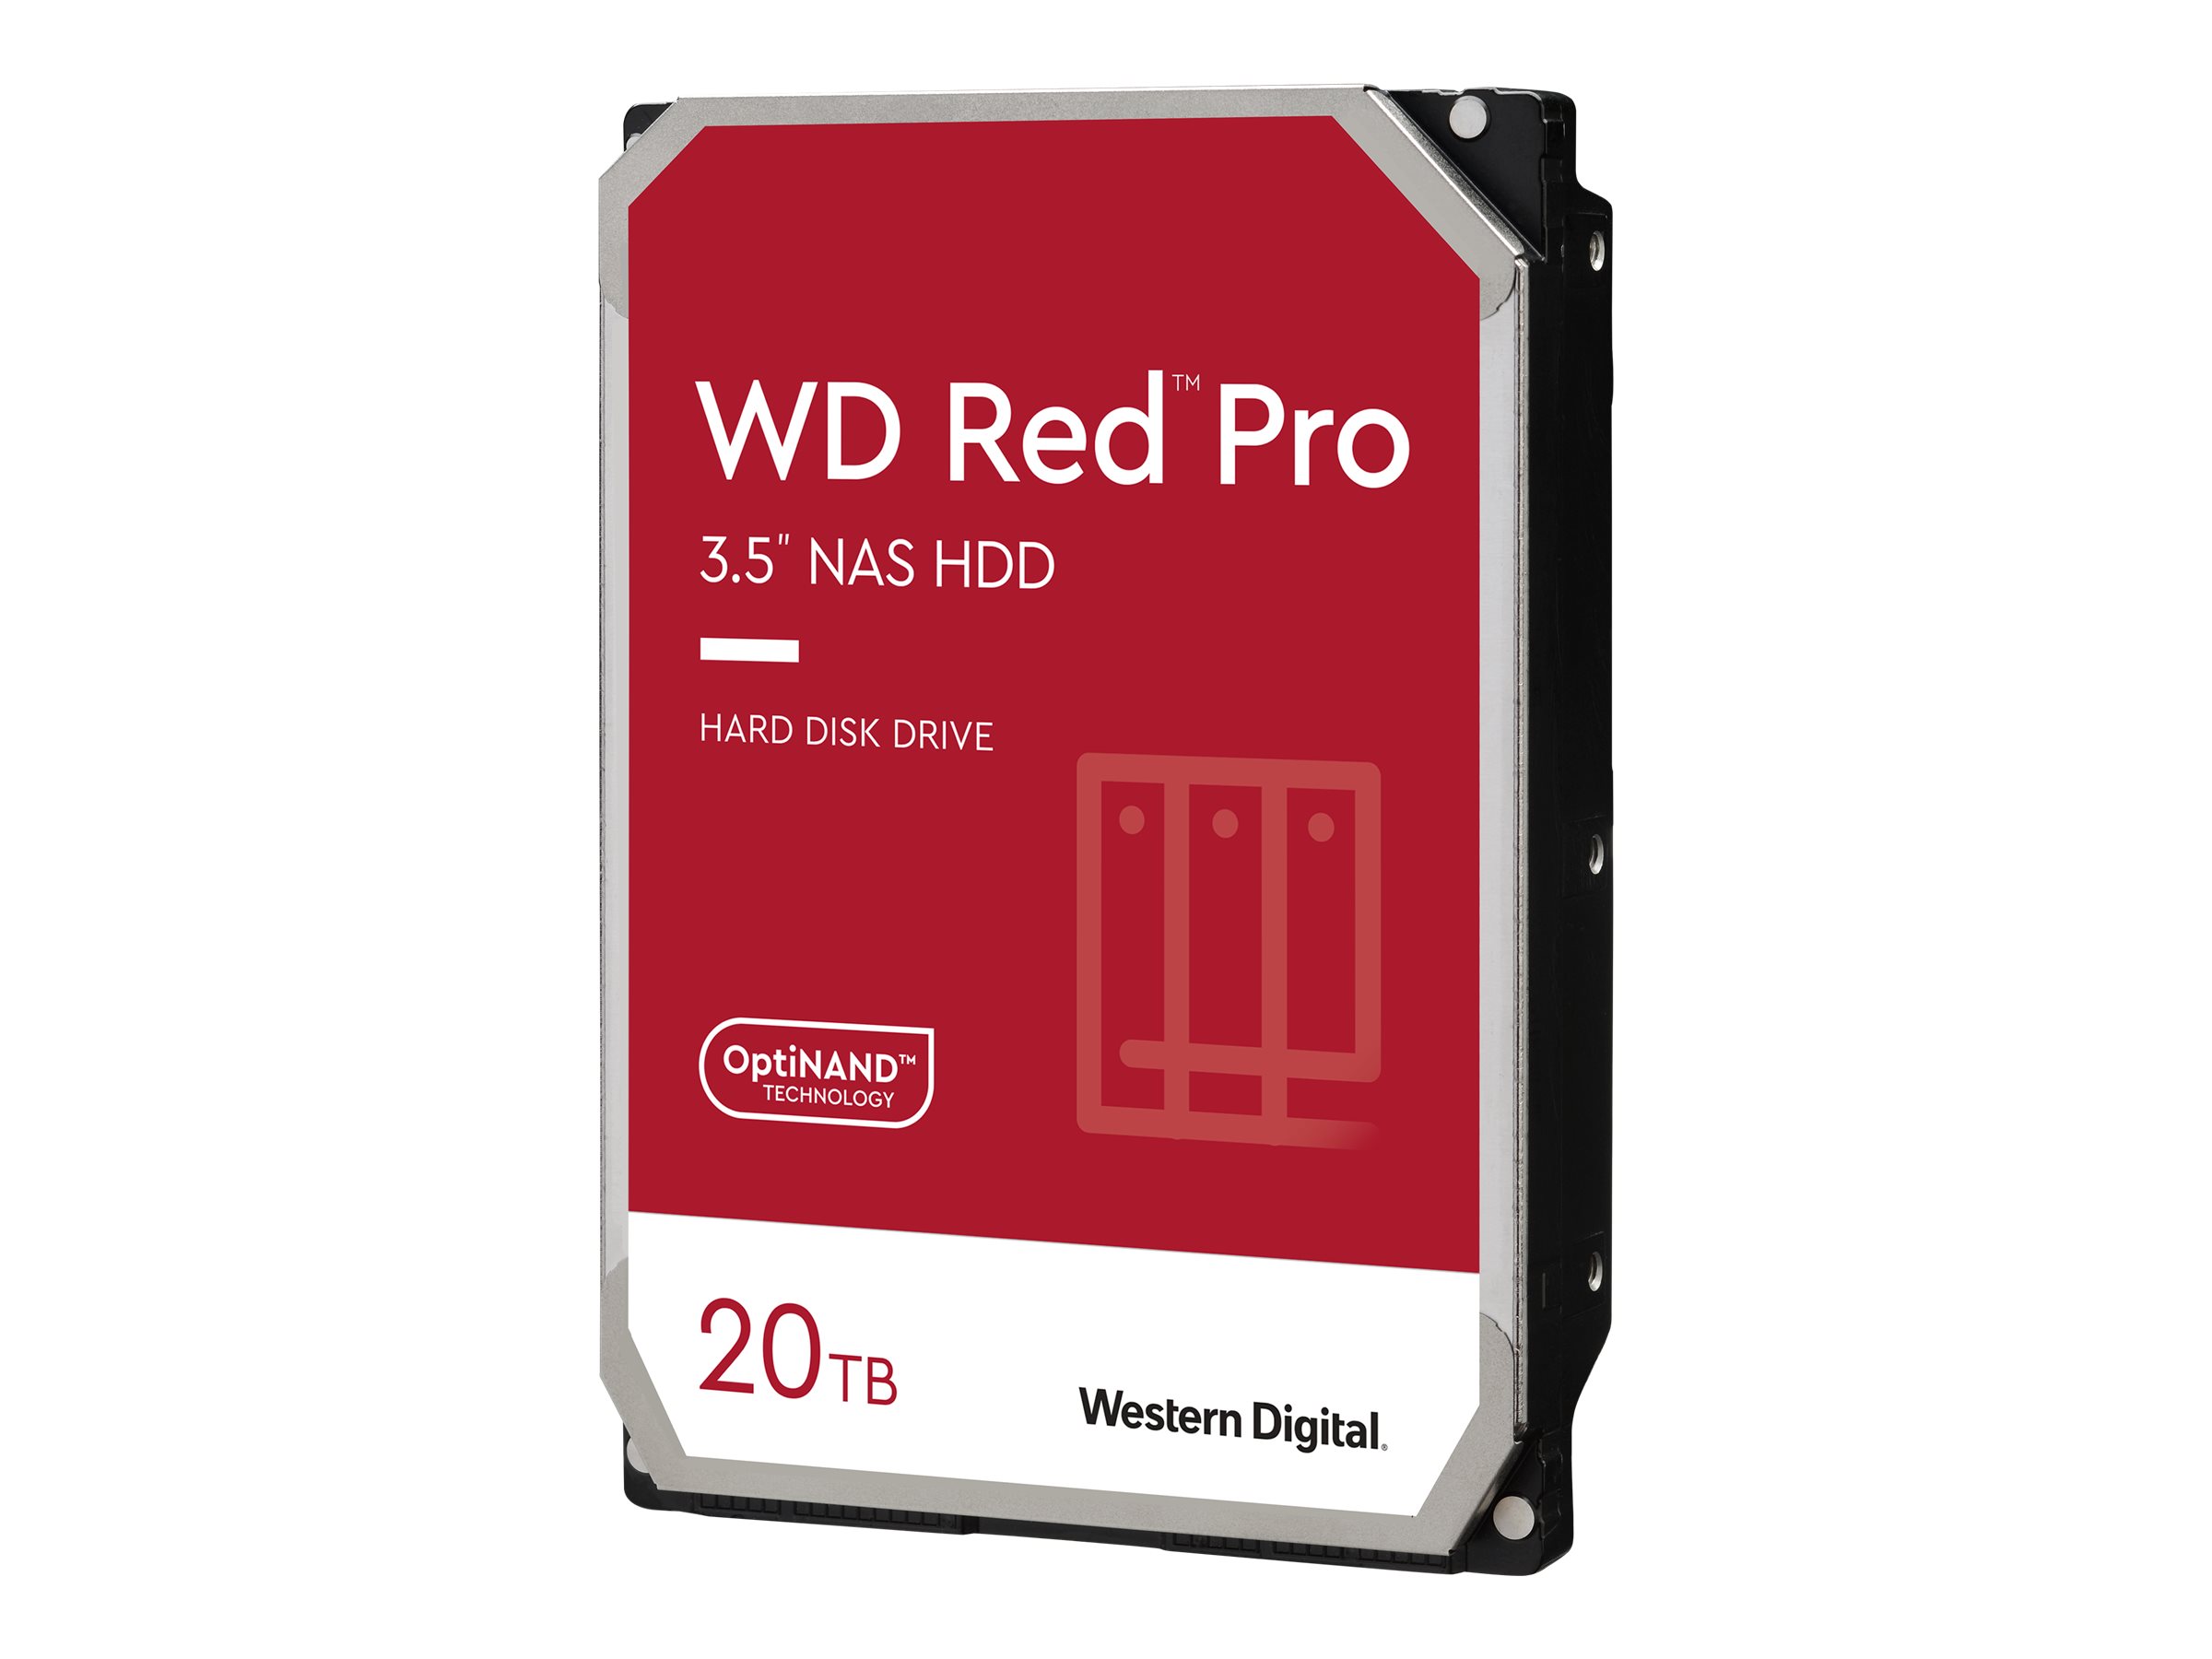 WD Red Pro WD201KFGX - Disque dur - 20 To - interne - 3.5" - SATA 6Gb/s - 7200 tours/min - mémoire tampon : 512 Mo - WD201KFGX - Disques durs internes